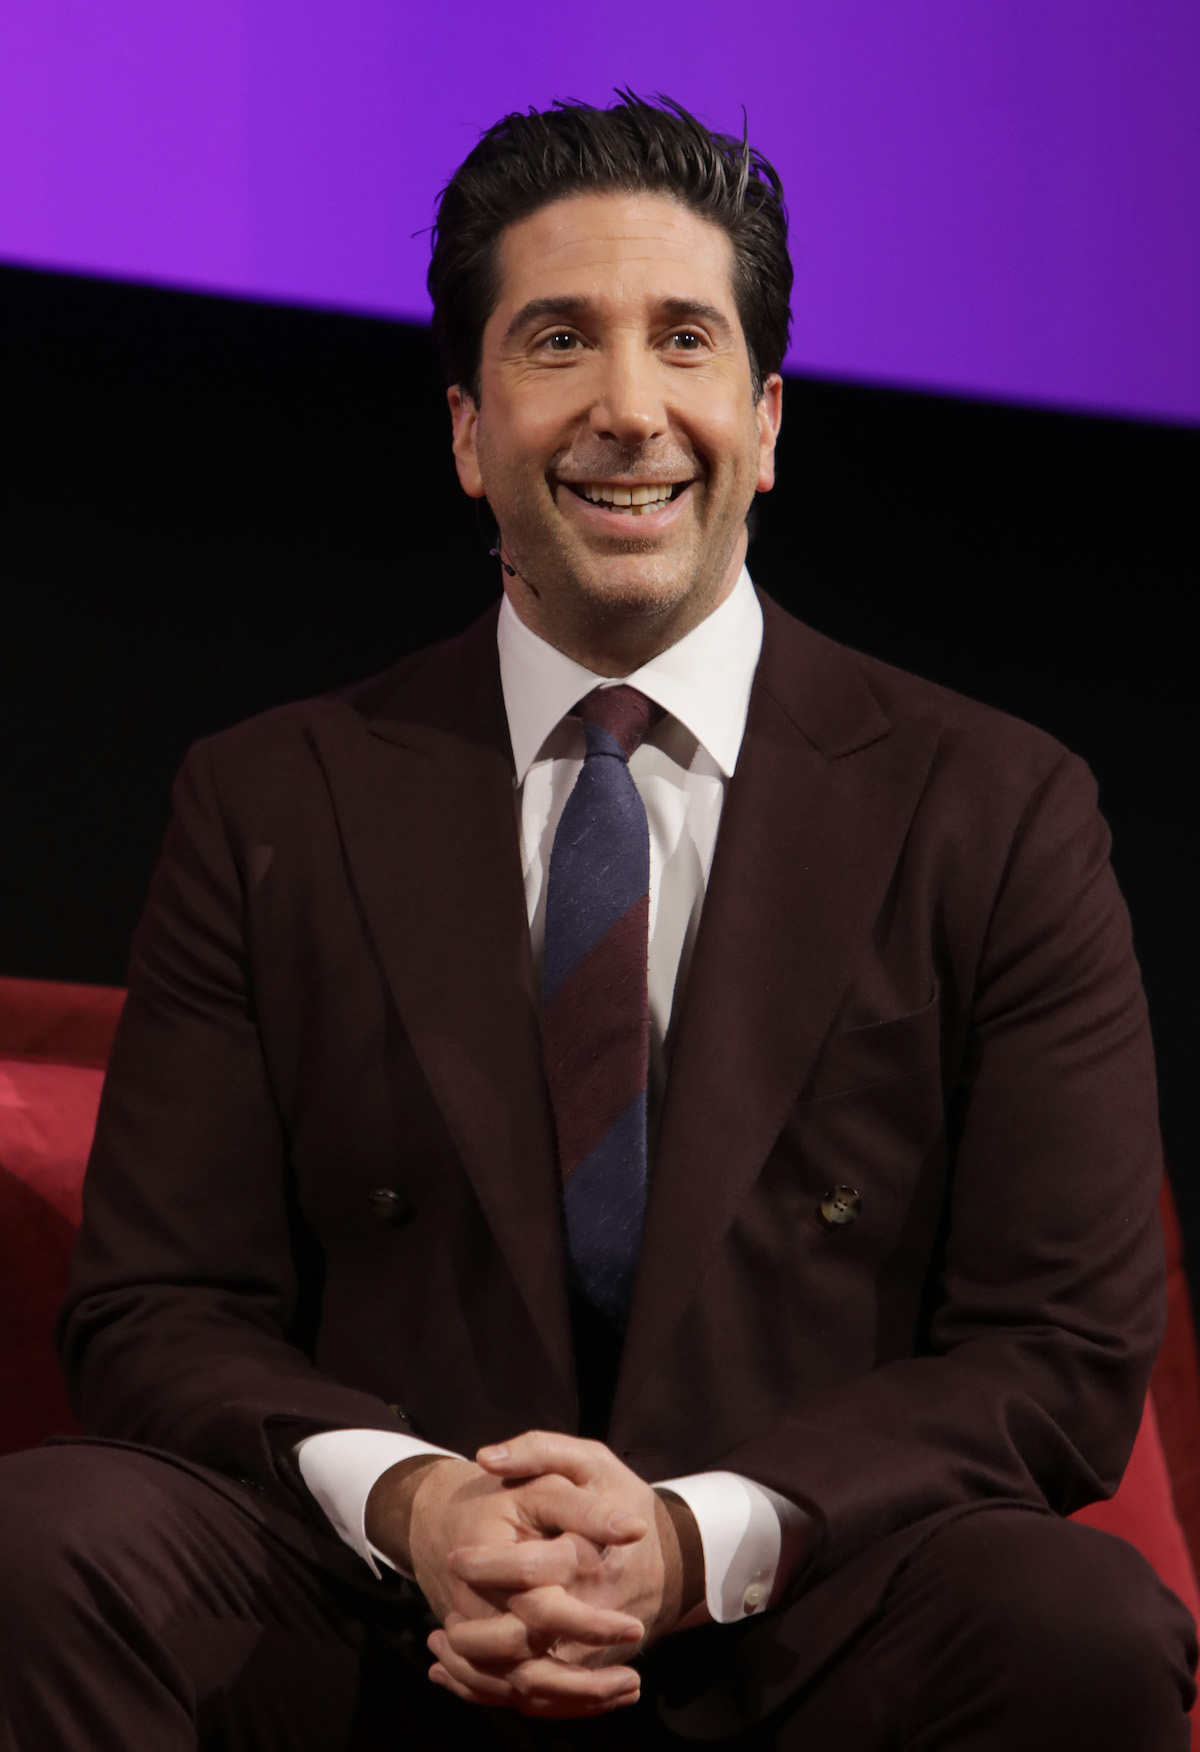 David Schwimmer wearing a suit and tie, seating with his hands clasped and smiling.